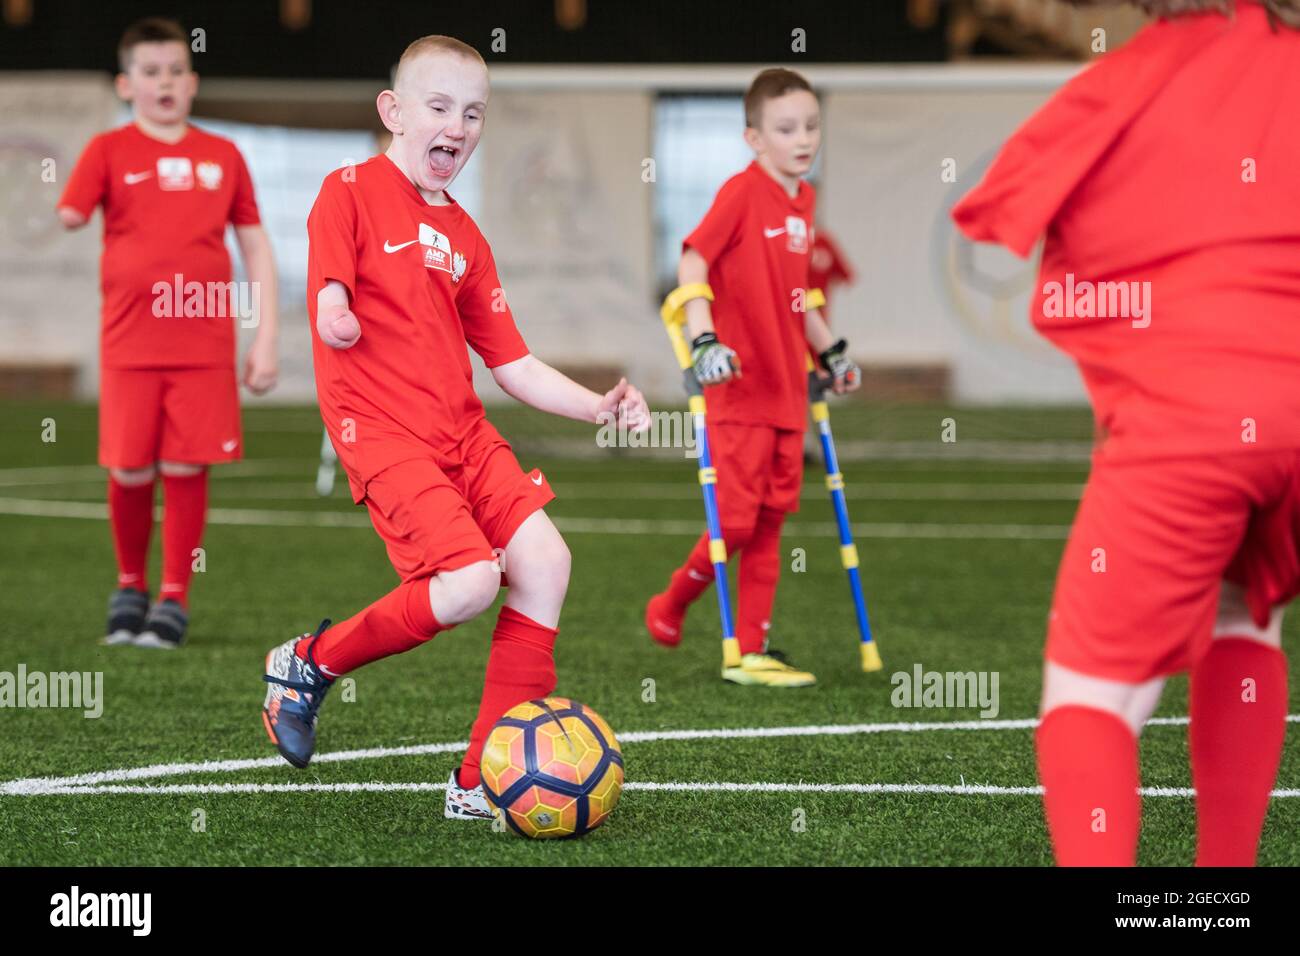 MACHNICE, POLAND - APRIL 6, 2019: Training of National Junior AMP Football team during grouping of children and adolescents after amputations and with Stock Photo